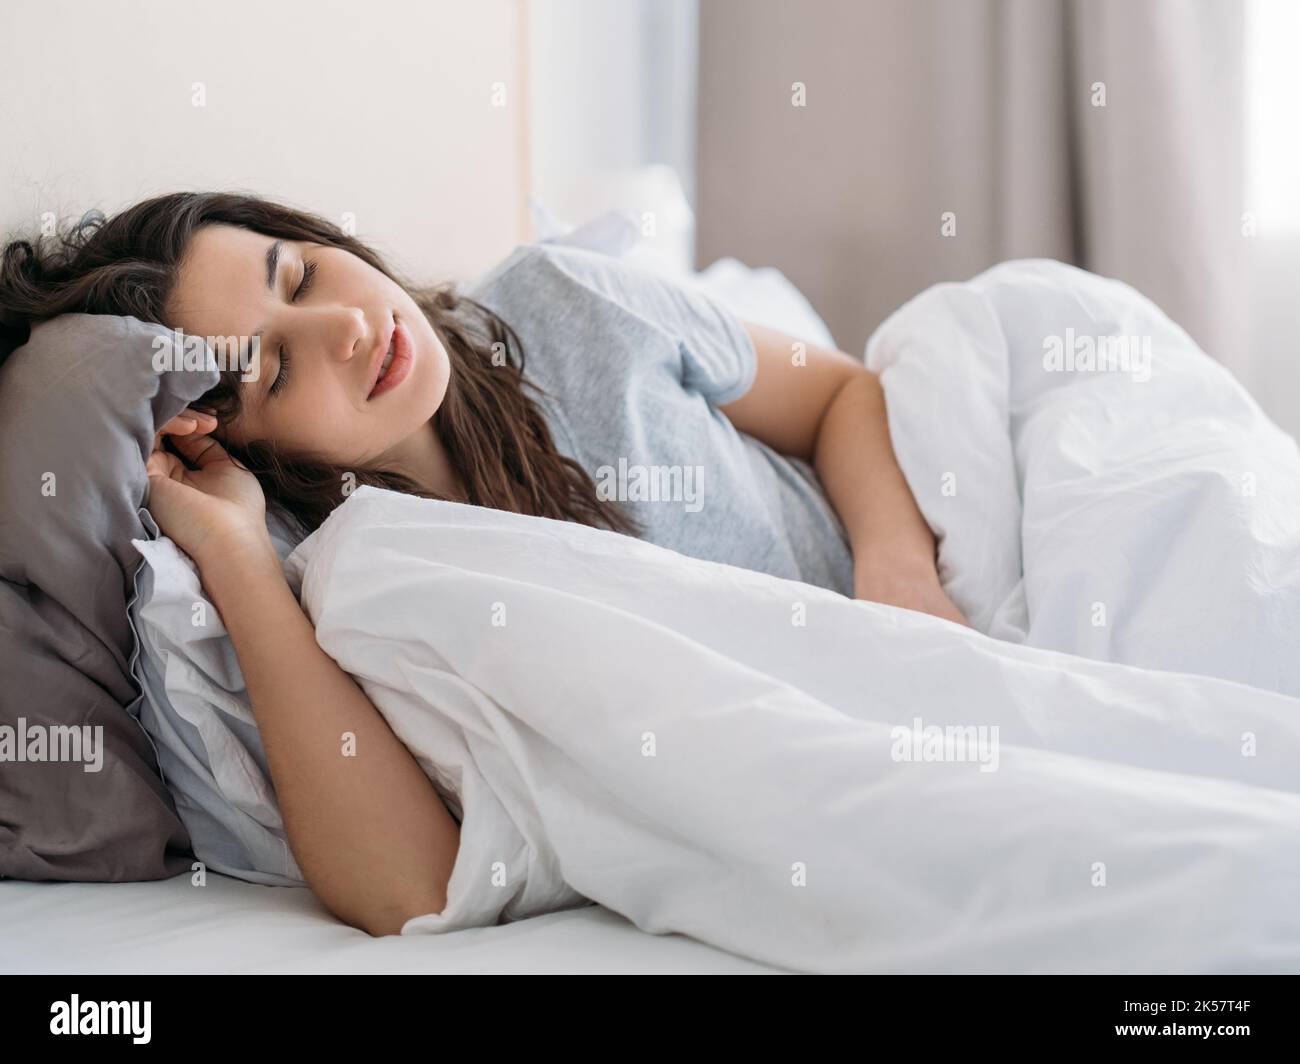 Morning nap. Lazy weekend. Home relaxation. Peaceful happy brunette woman sleeping enjoying rest lying in cozy bed with white blanket in light bedroom Stock Photo